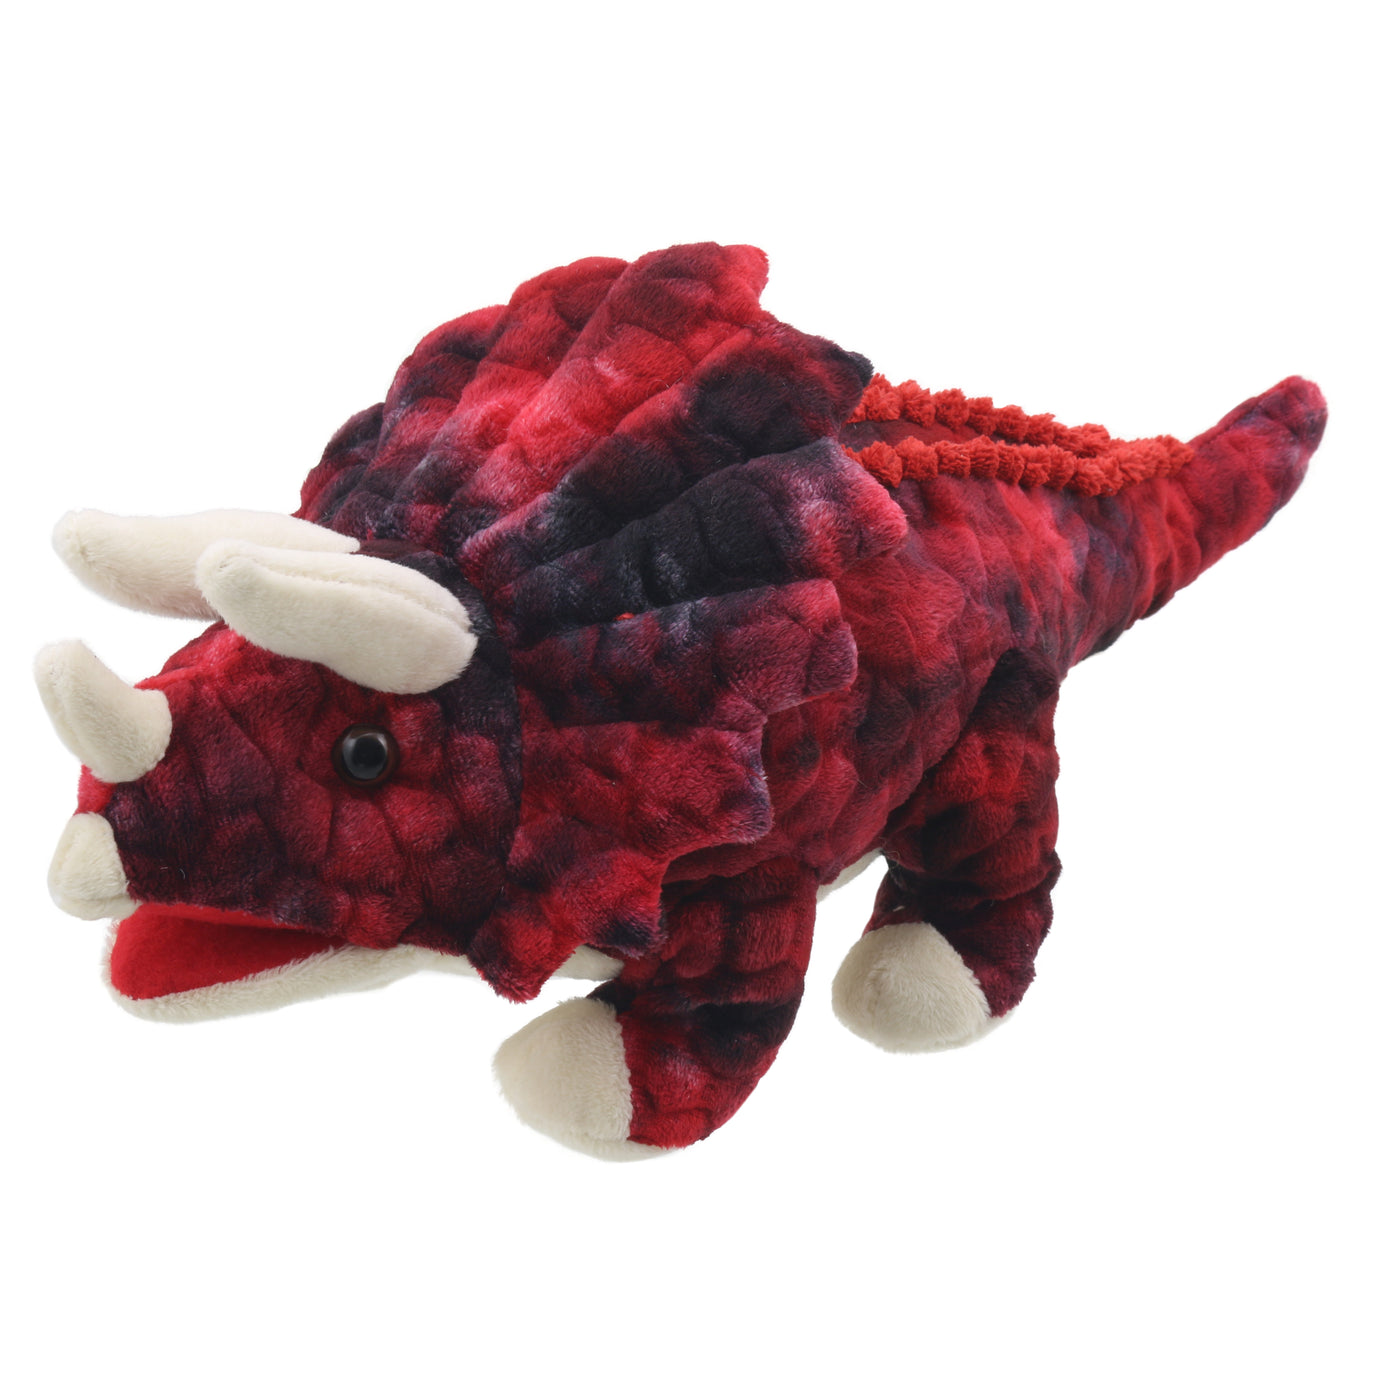 Baby Dino Puppet - Red Triceratops